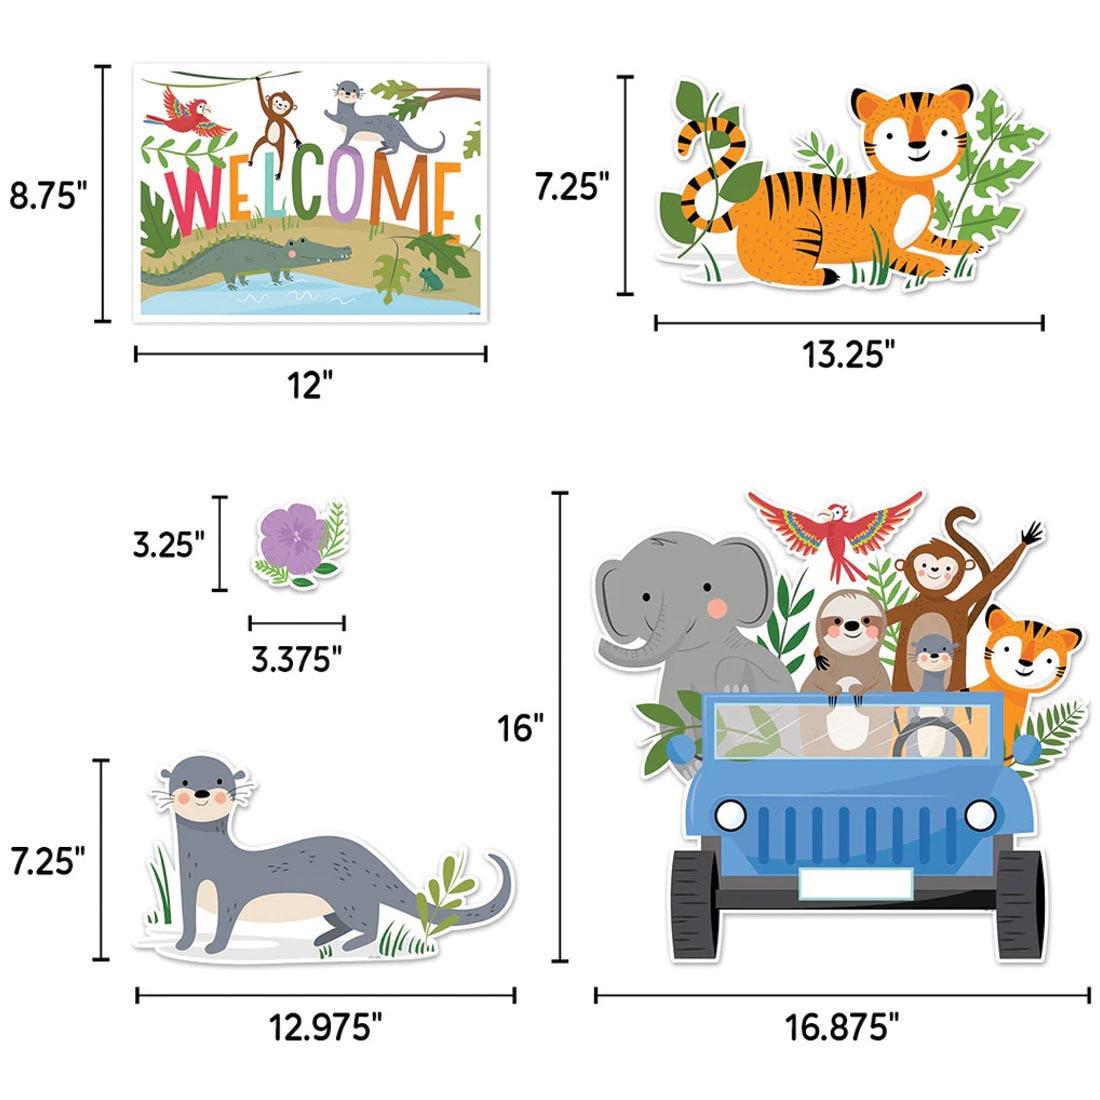 pieces from the Bulletin Board Set from the Jungle Friends collection by Creative Teaching Press labeled with their measurements